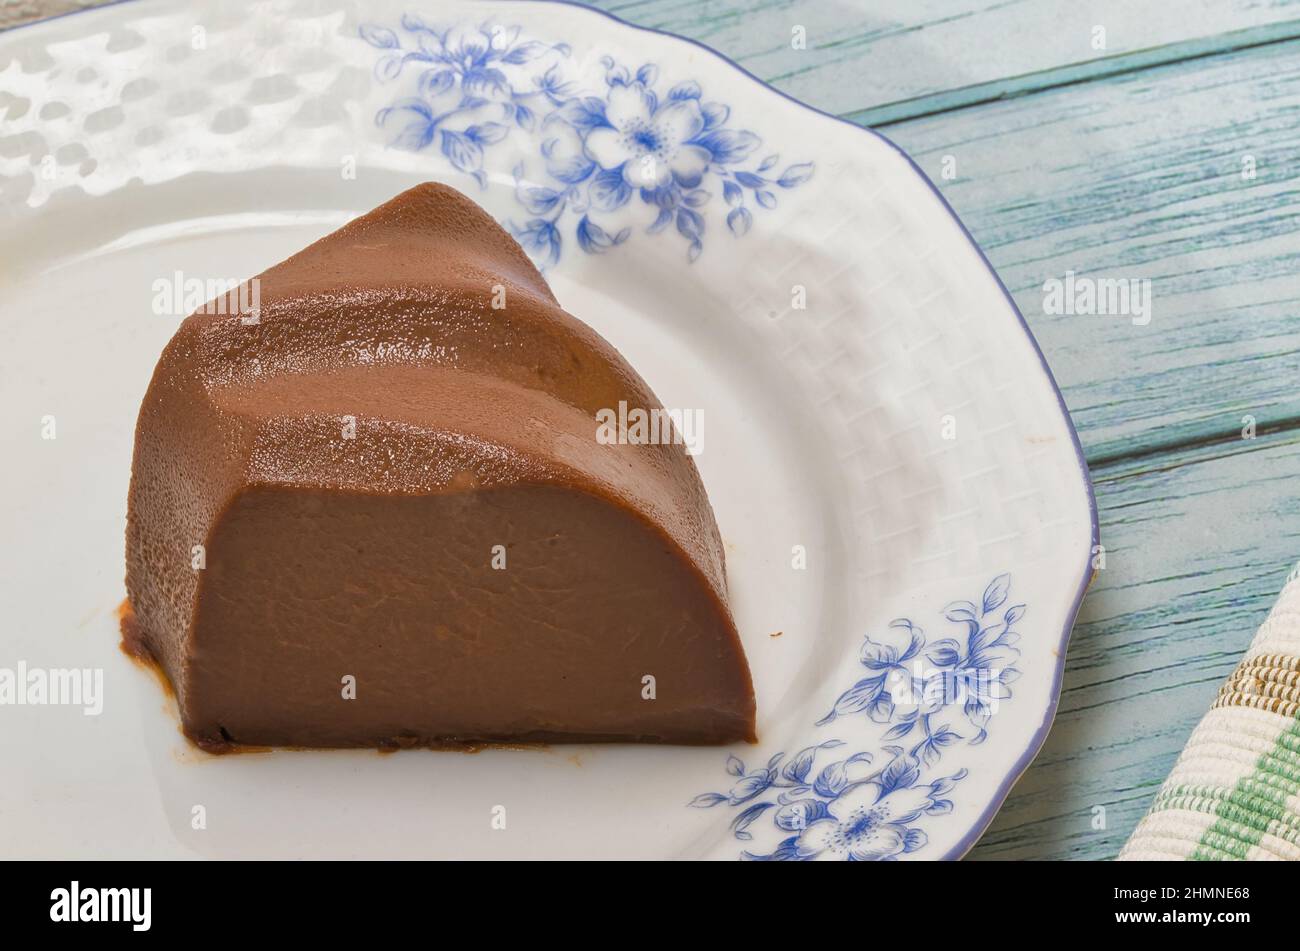 Fresh homemade cocoa pudding with organic milk and organic cocoa. A typical traditional dessert. Tasty, healthy and nutritious breakfast or snack. Stock Photo